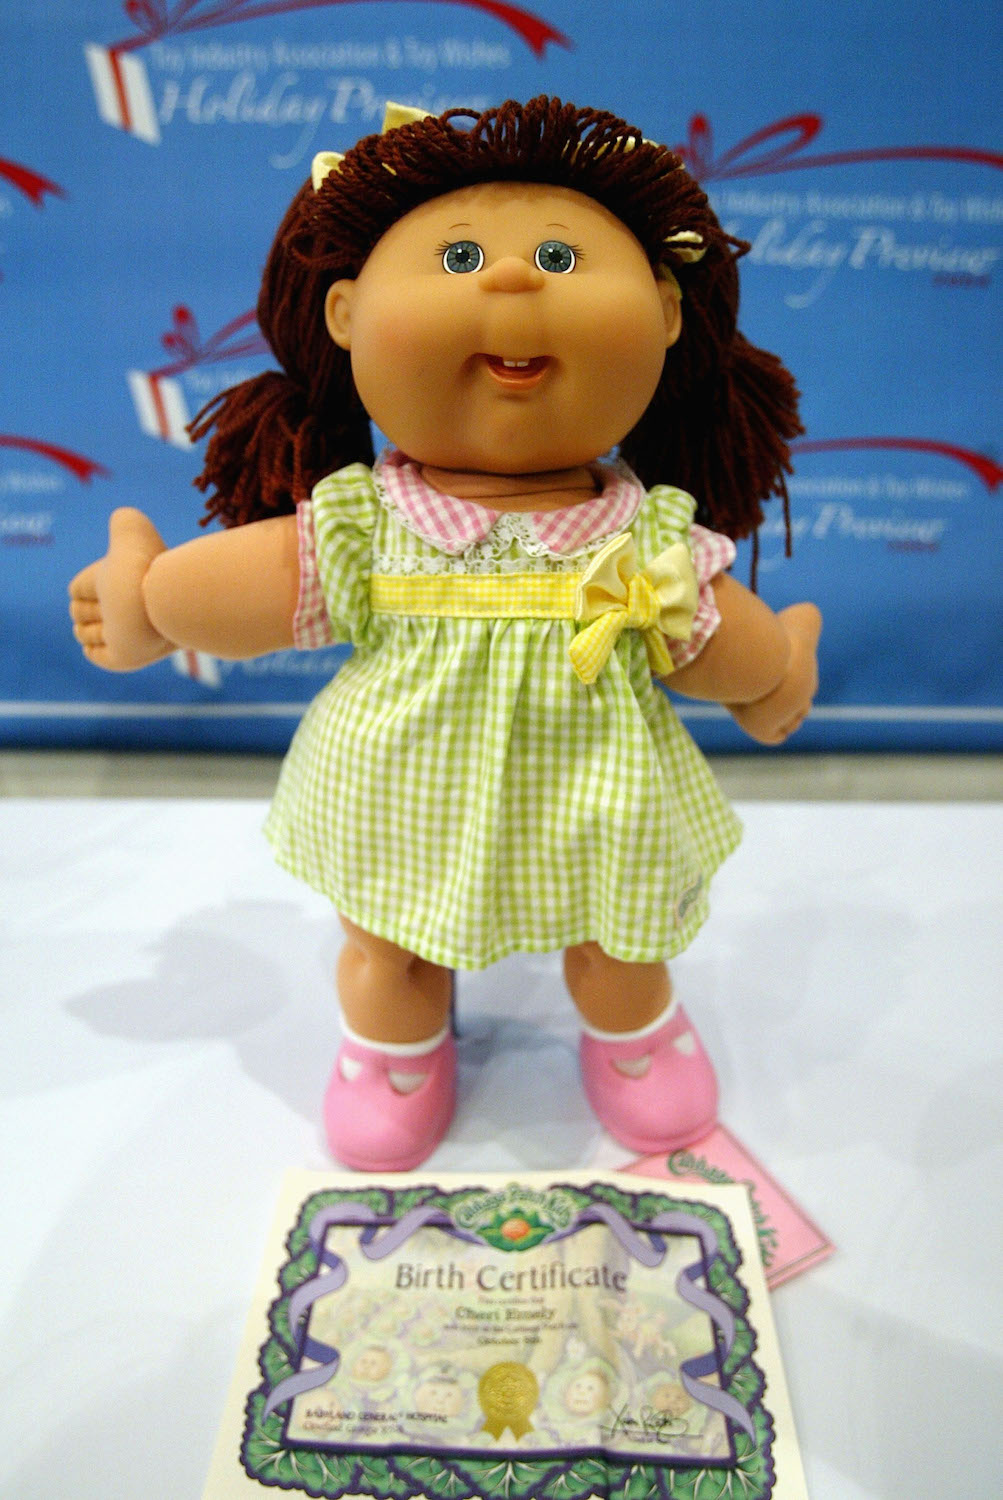 homemade cabbage patch doll